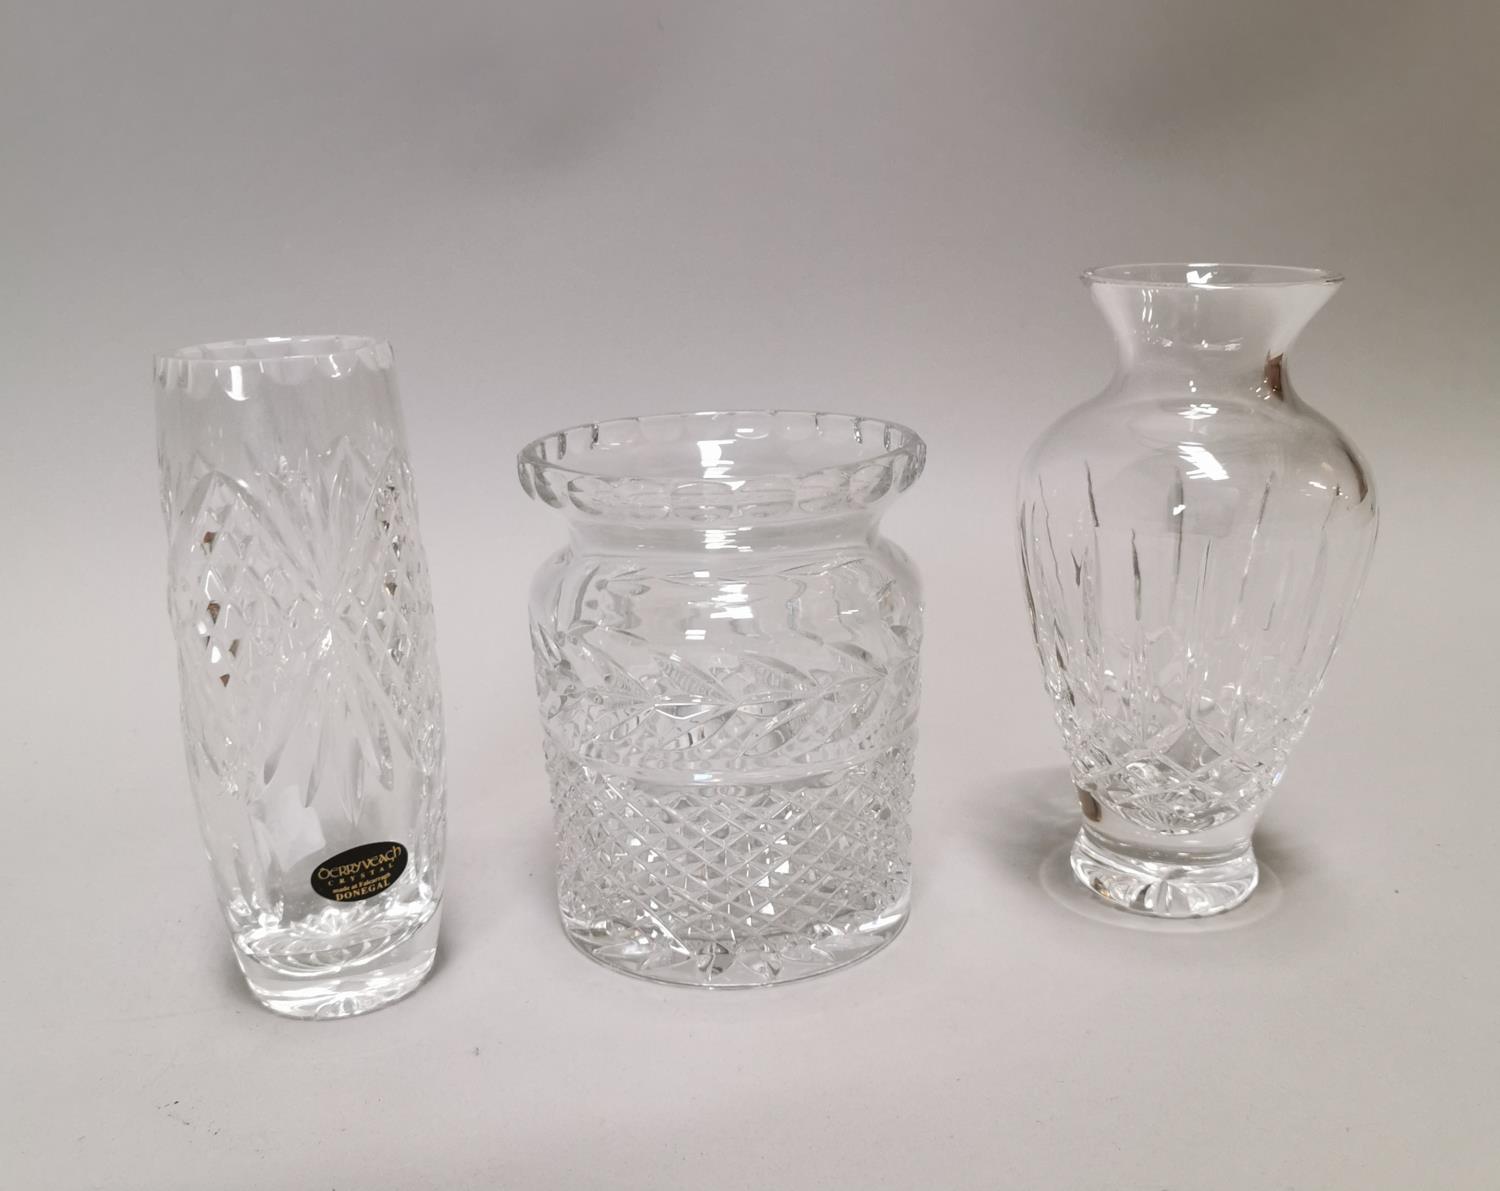 Three pieces of Donegal Crystal. - Image 2 of 2